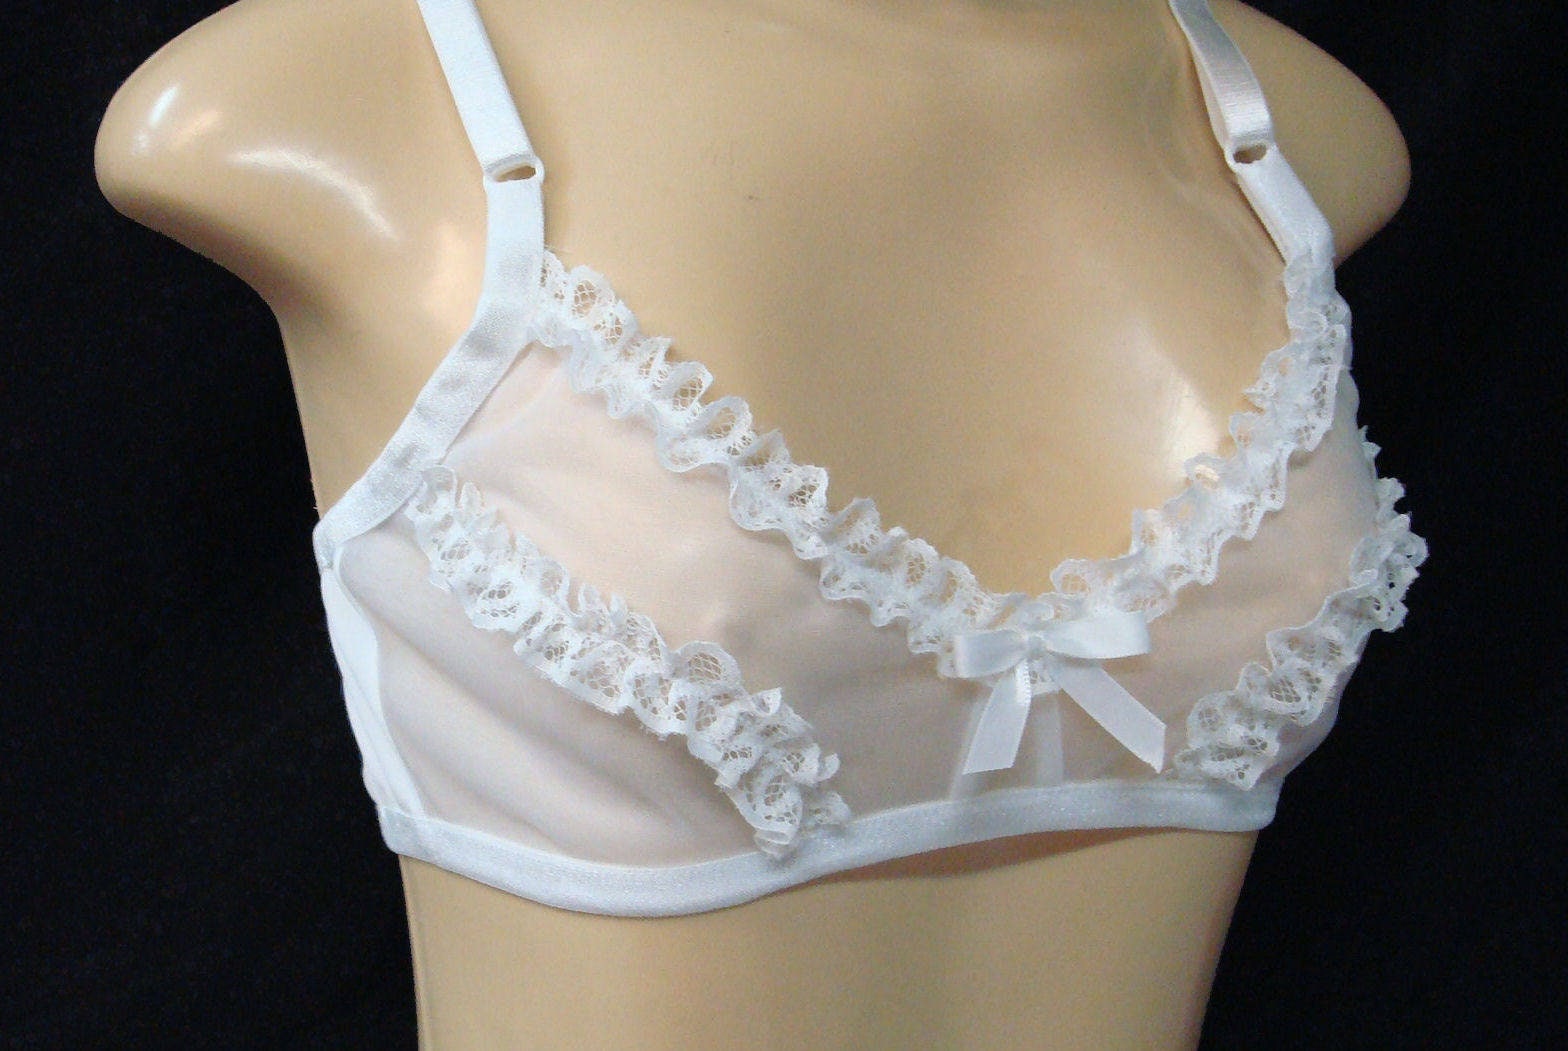 White Sheer Nylon Chiffon BRA with Lace - available in all COLORS